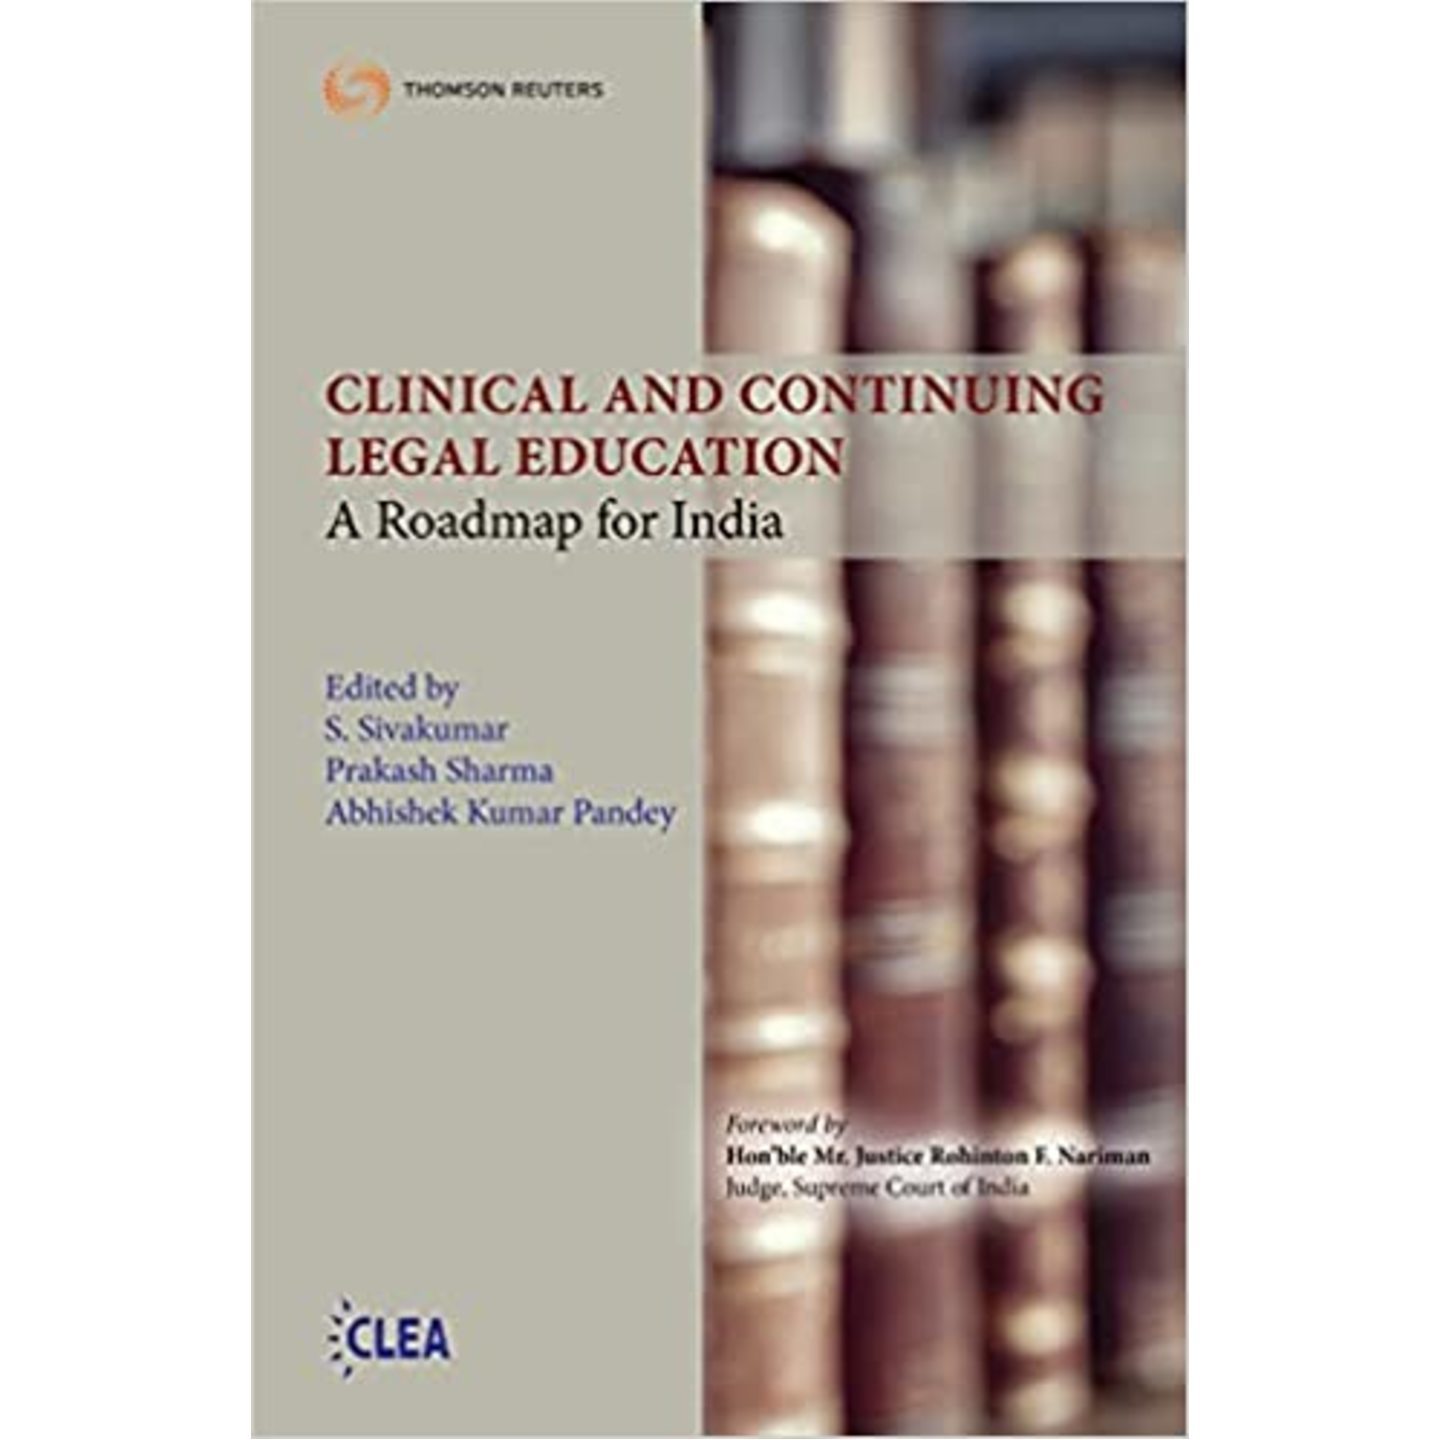 Clinical and Continuing Legal Education